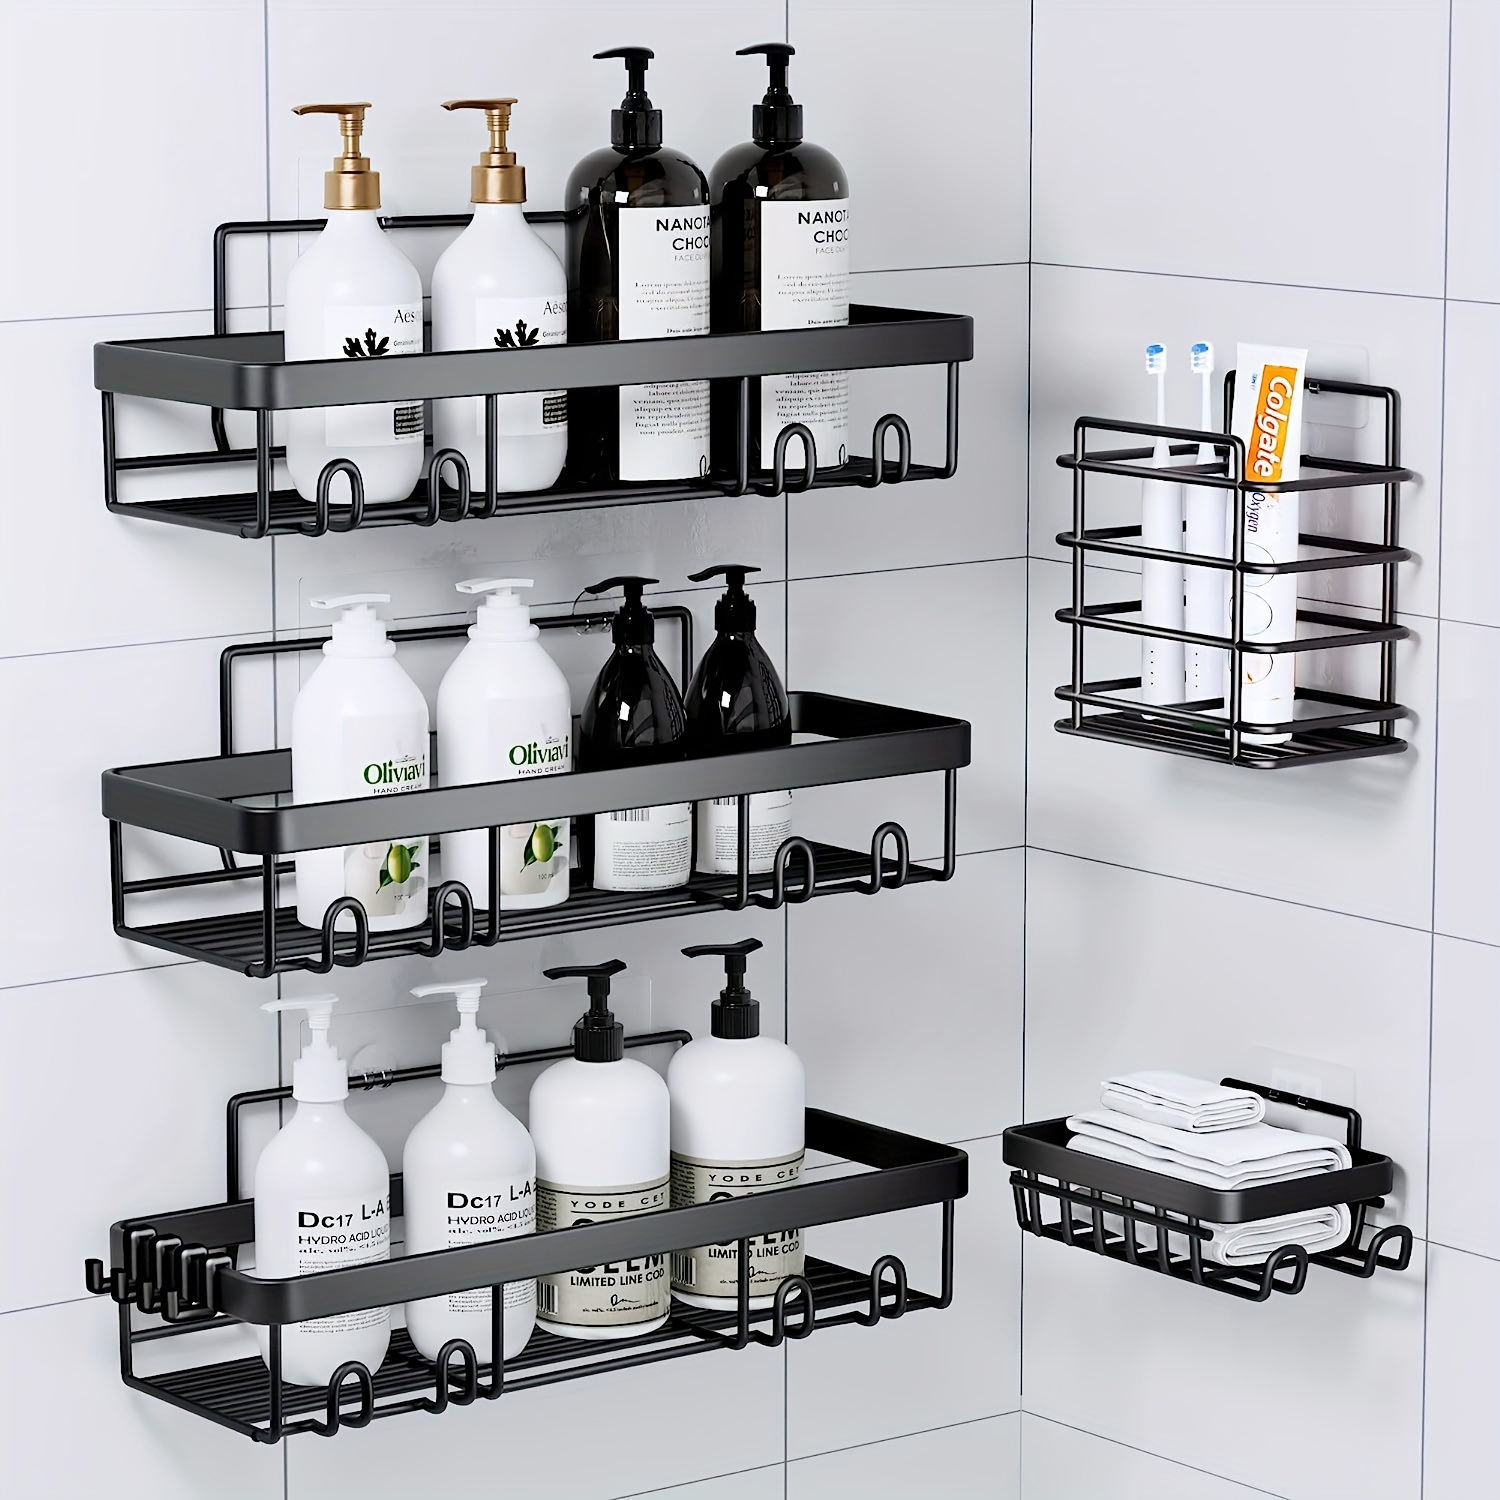 

5pcs/set Shower Caddies, Bathroom Shower Organizers, Black Shower Shelves For Inside Shower, Stainless Steel Adhesives Wall Mounted Rack, Home Organization And Storage, Bathroom Accessories